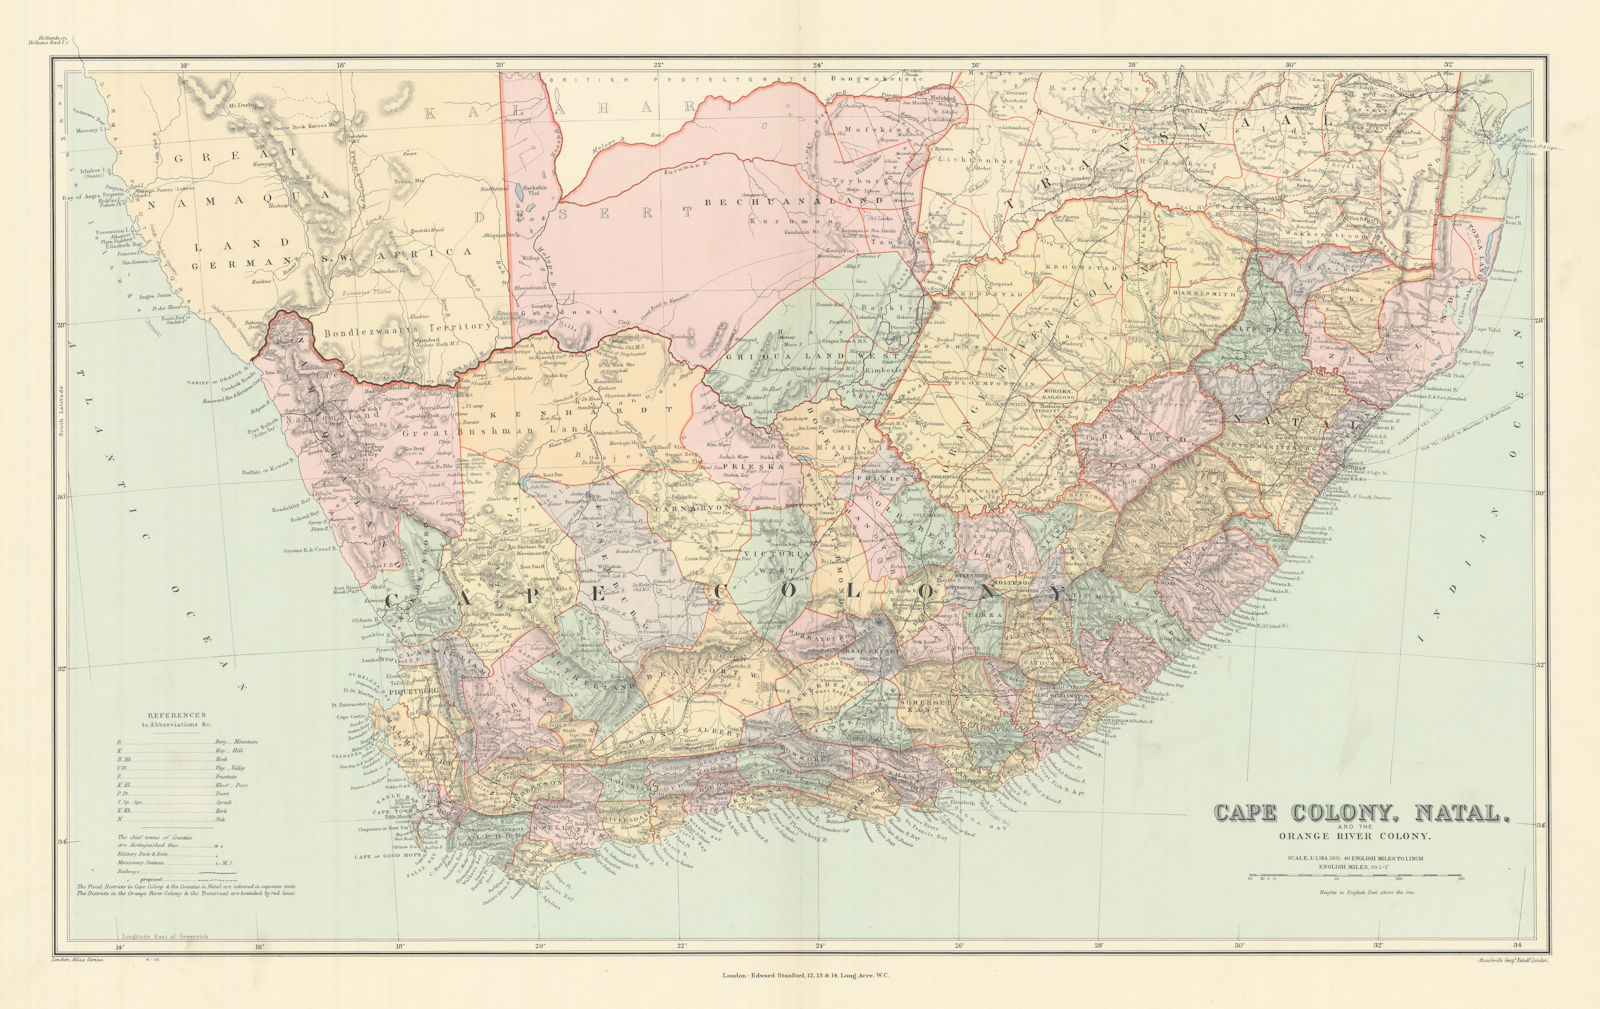 Cape Colony, Natal & Orange River Colony. South Africa 44x70cm STANFORD 1904 map